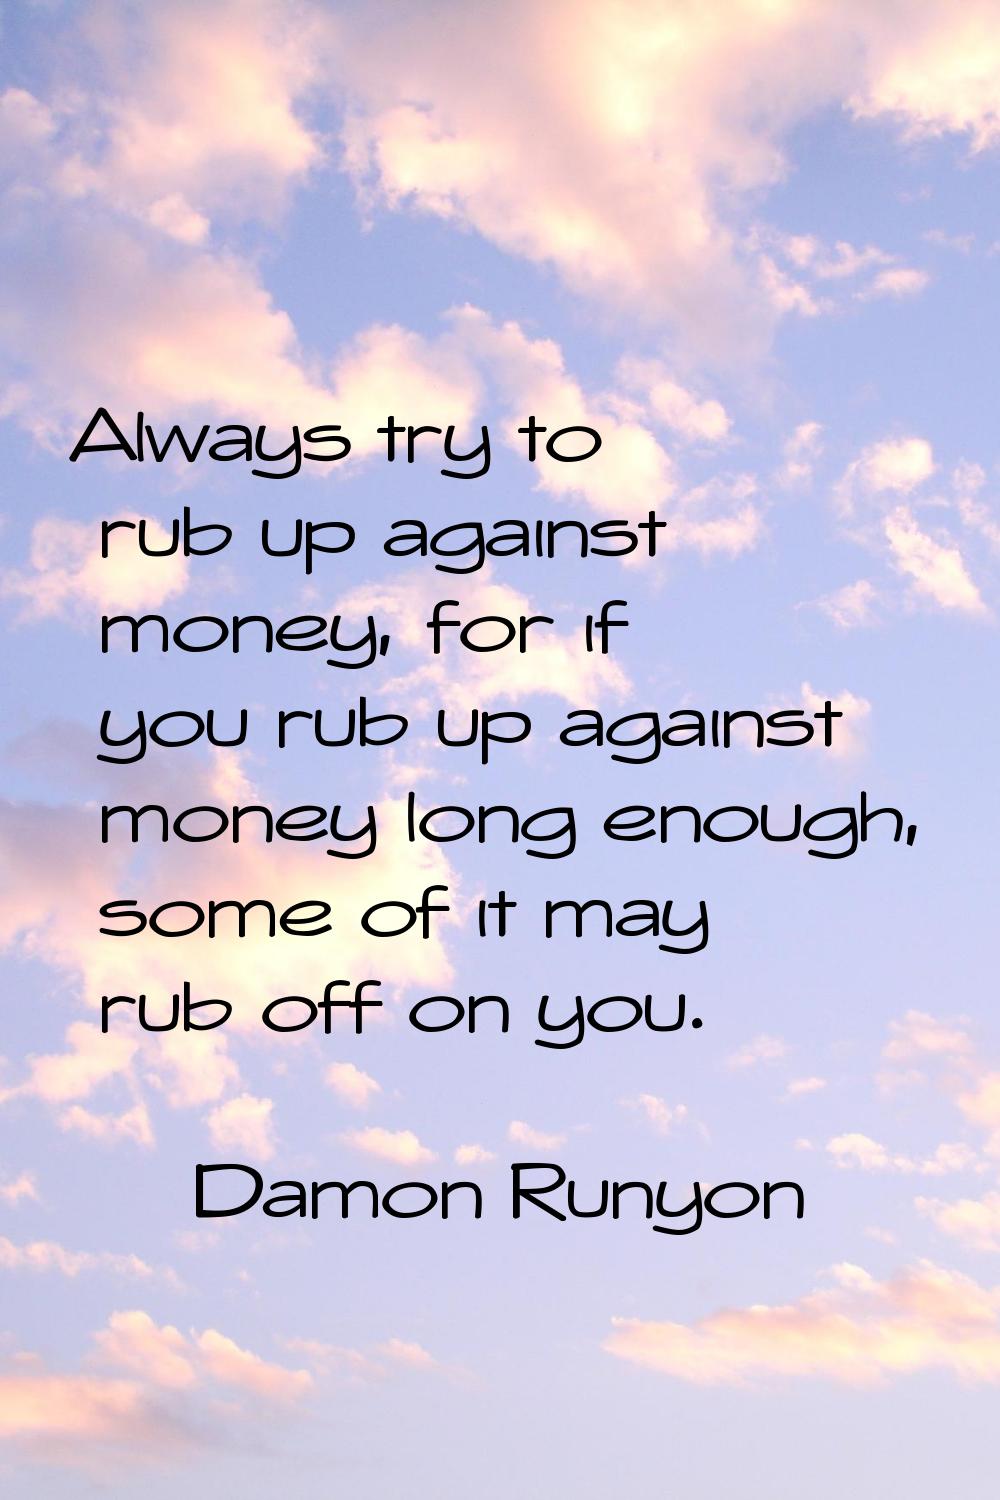 Always try to rub up against money, for if you rub up against money long enough, some of it may rub